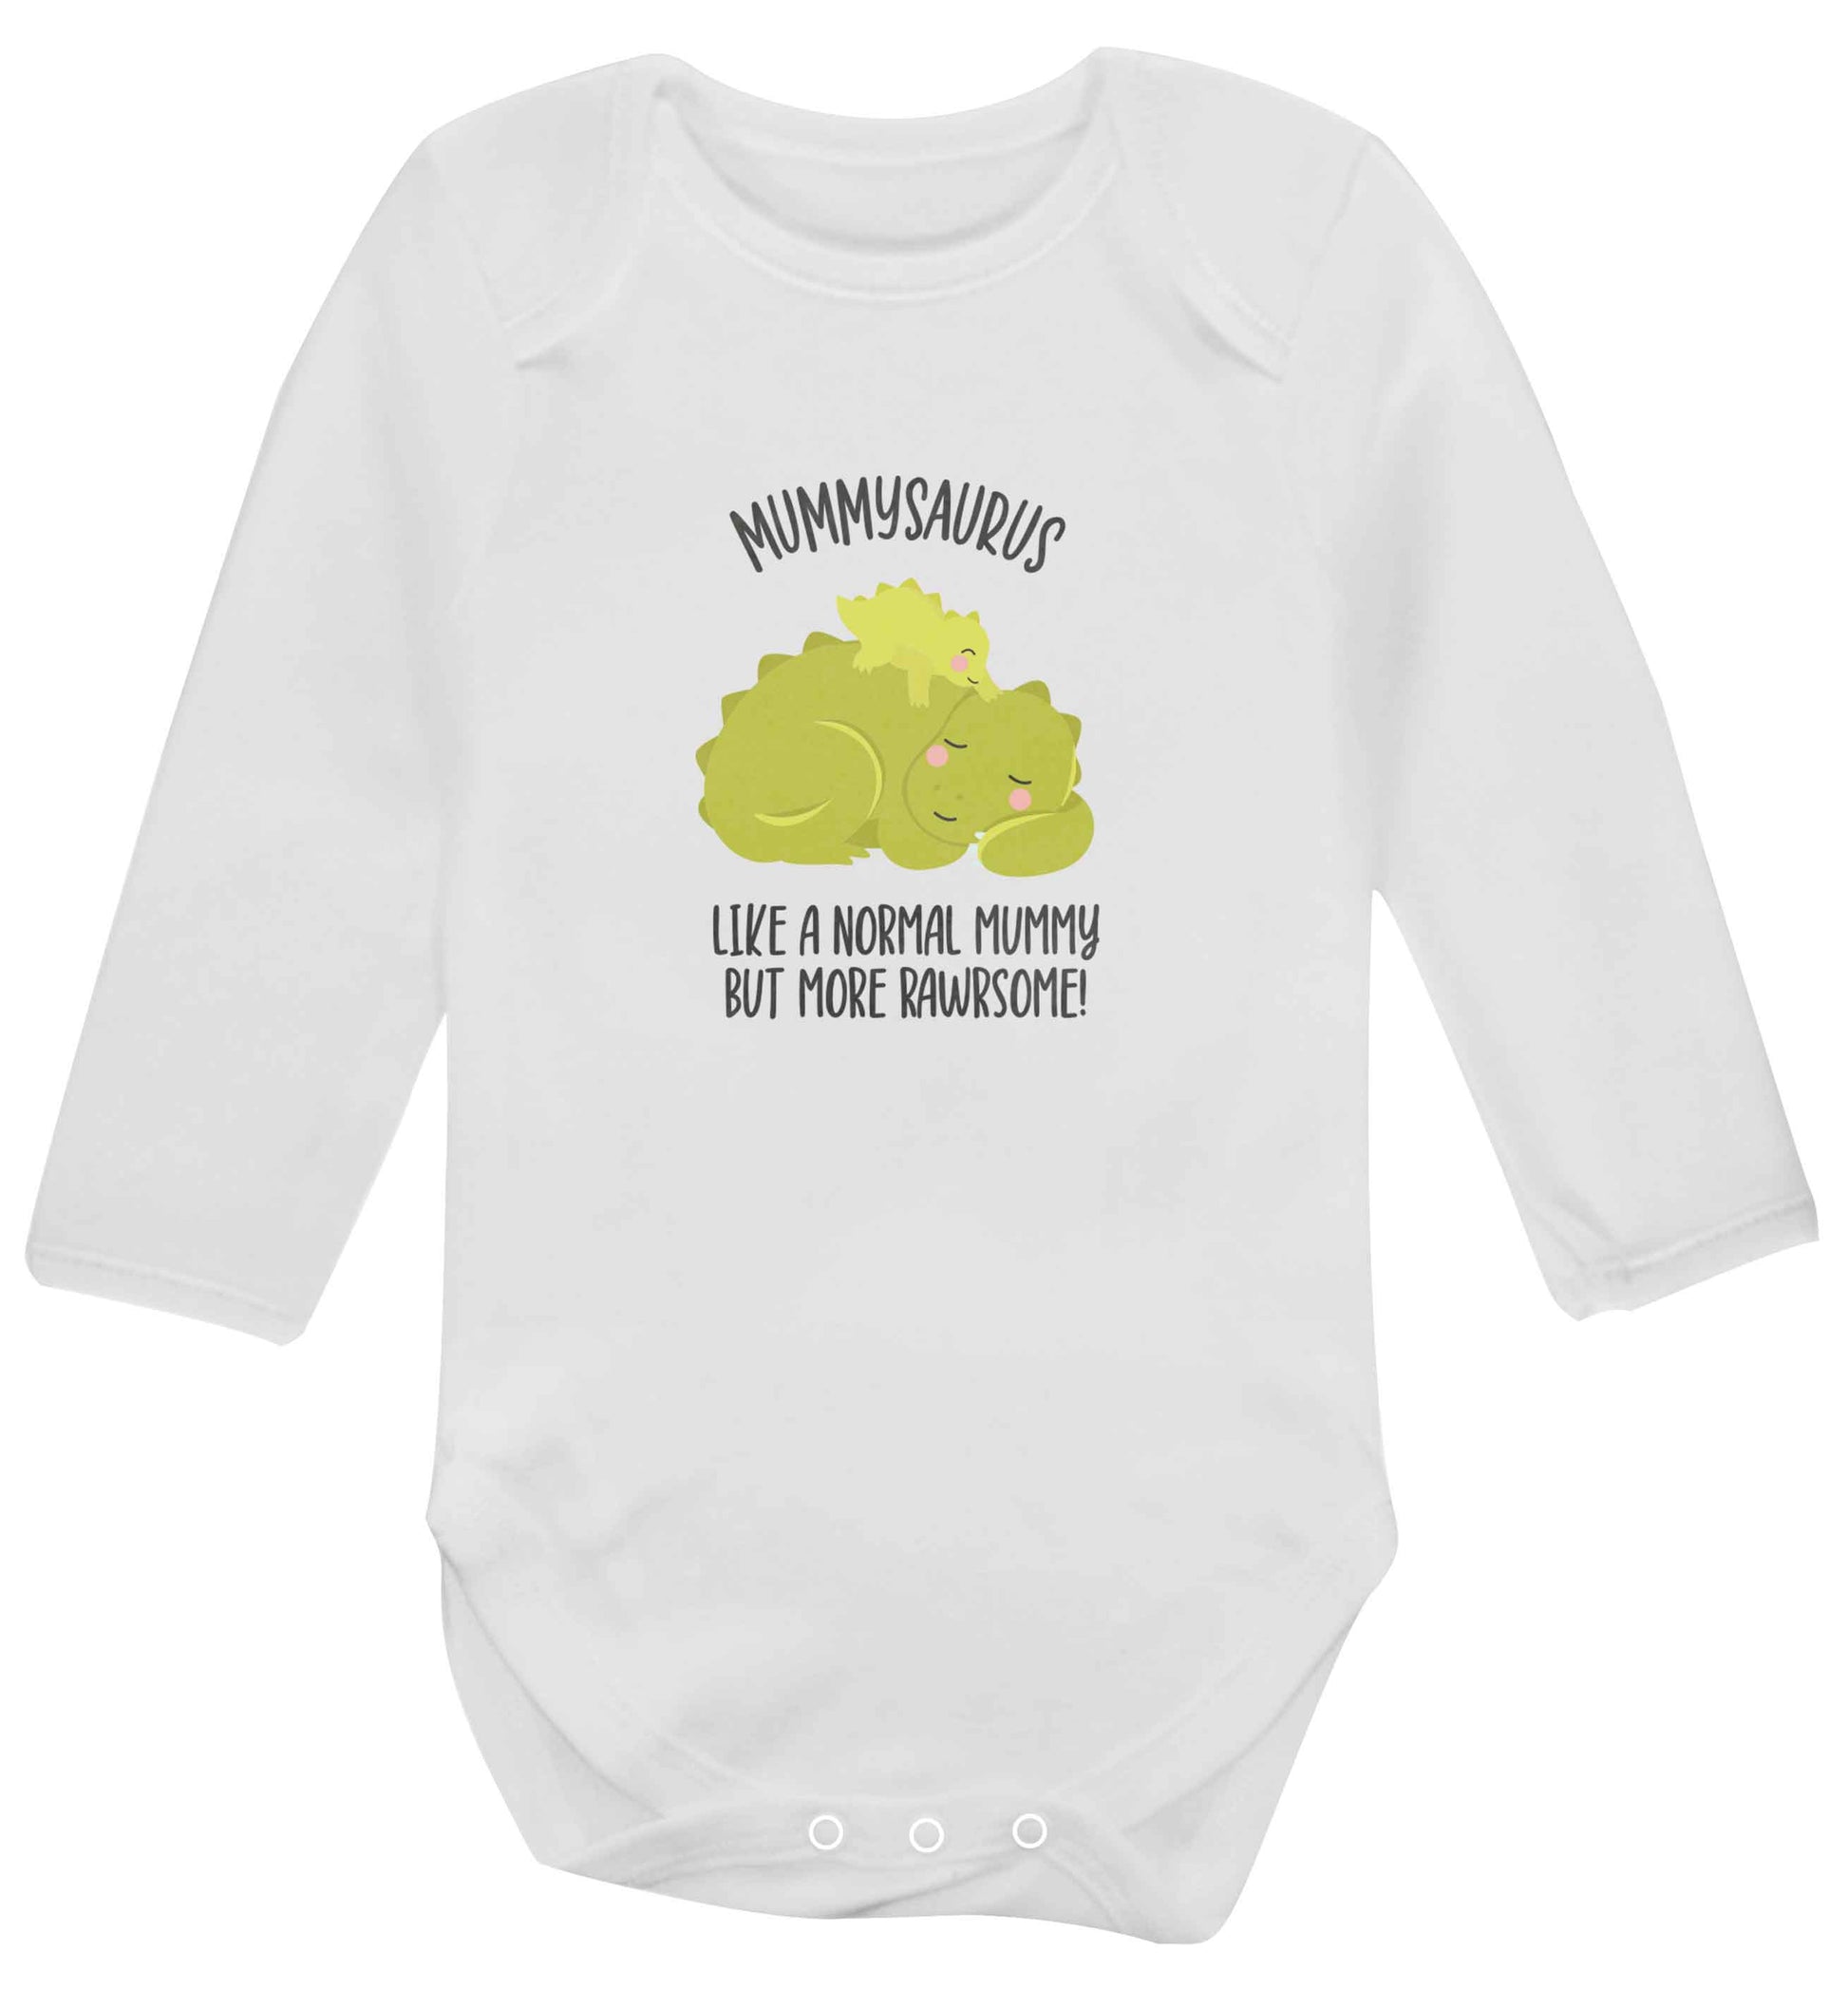 Mummysaurus like a normal mummy only more rawrsome baby vest long sleeved white 6-12 months